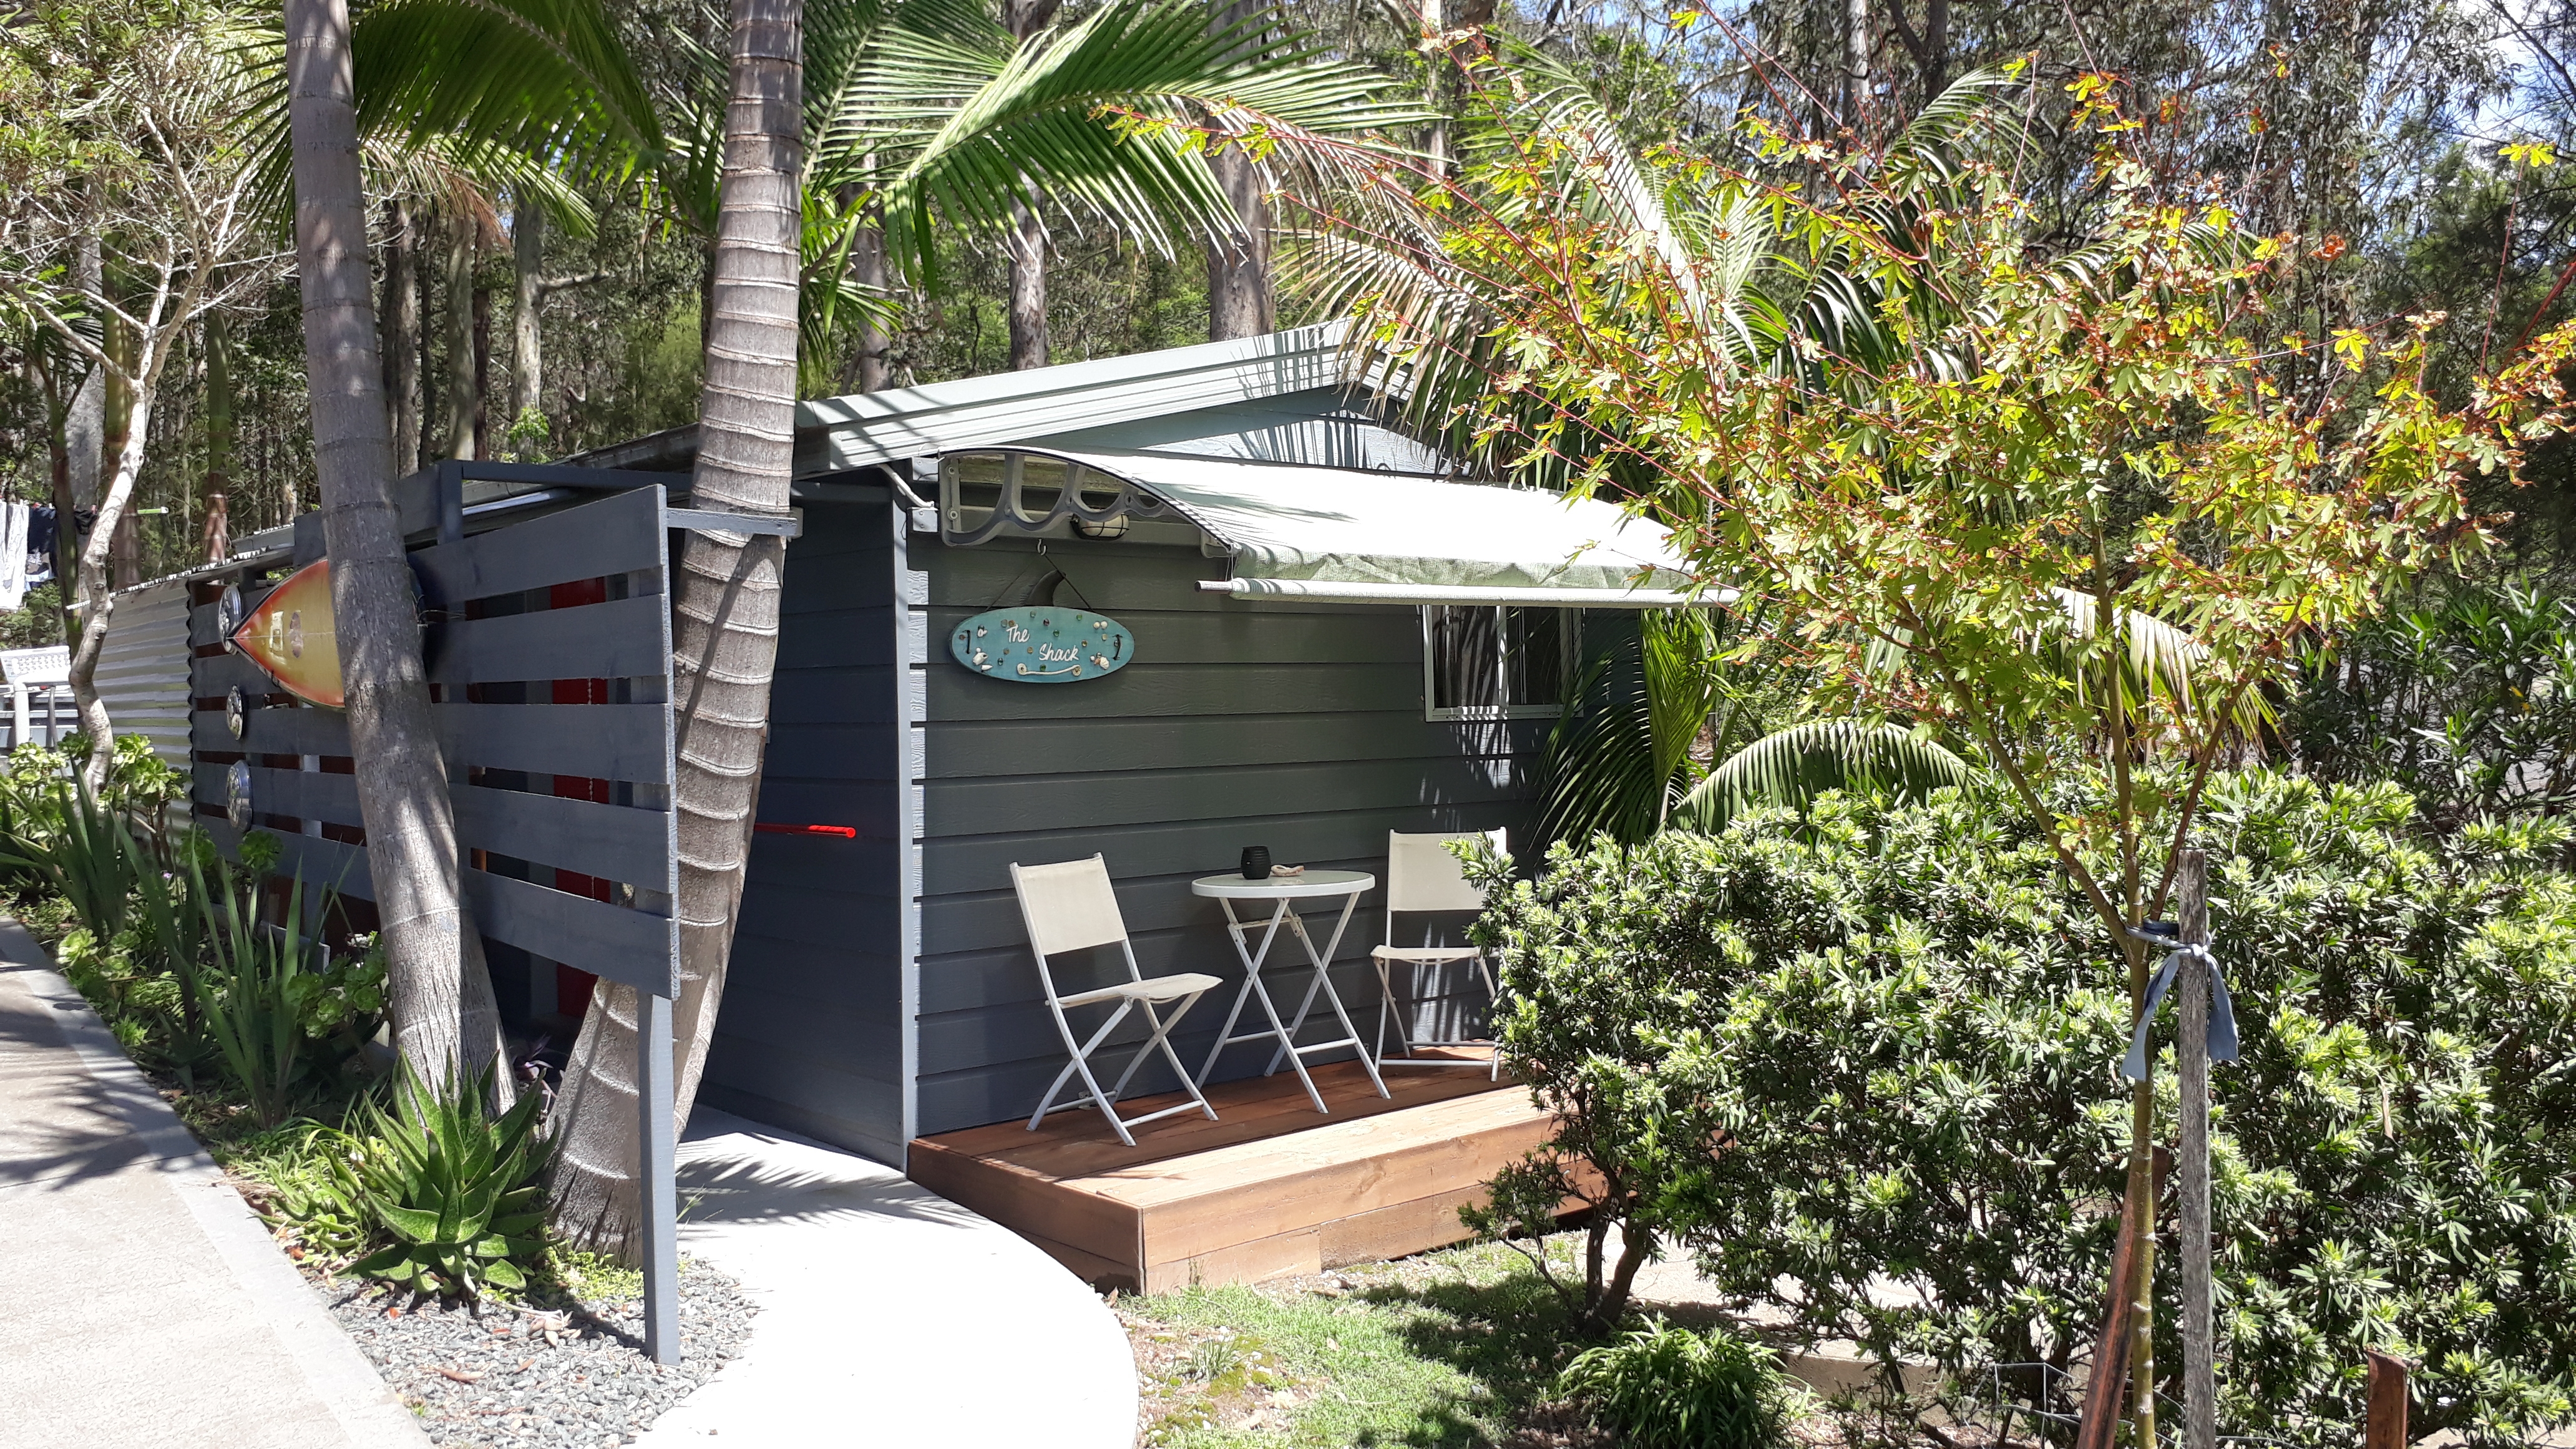 The Shack." Studio cabin for two. - Guesthouses for Rent in South Durras,  New South Wales, Australia